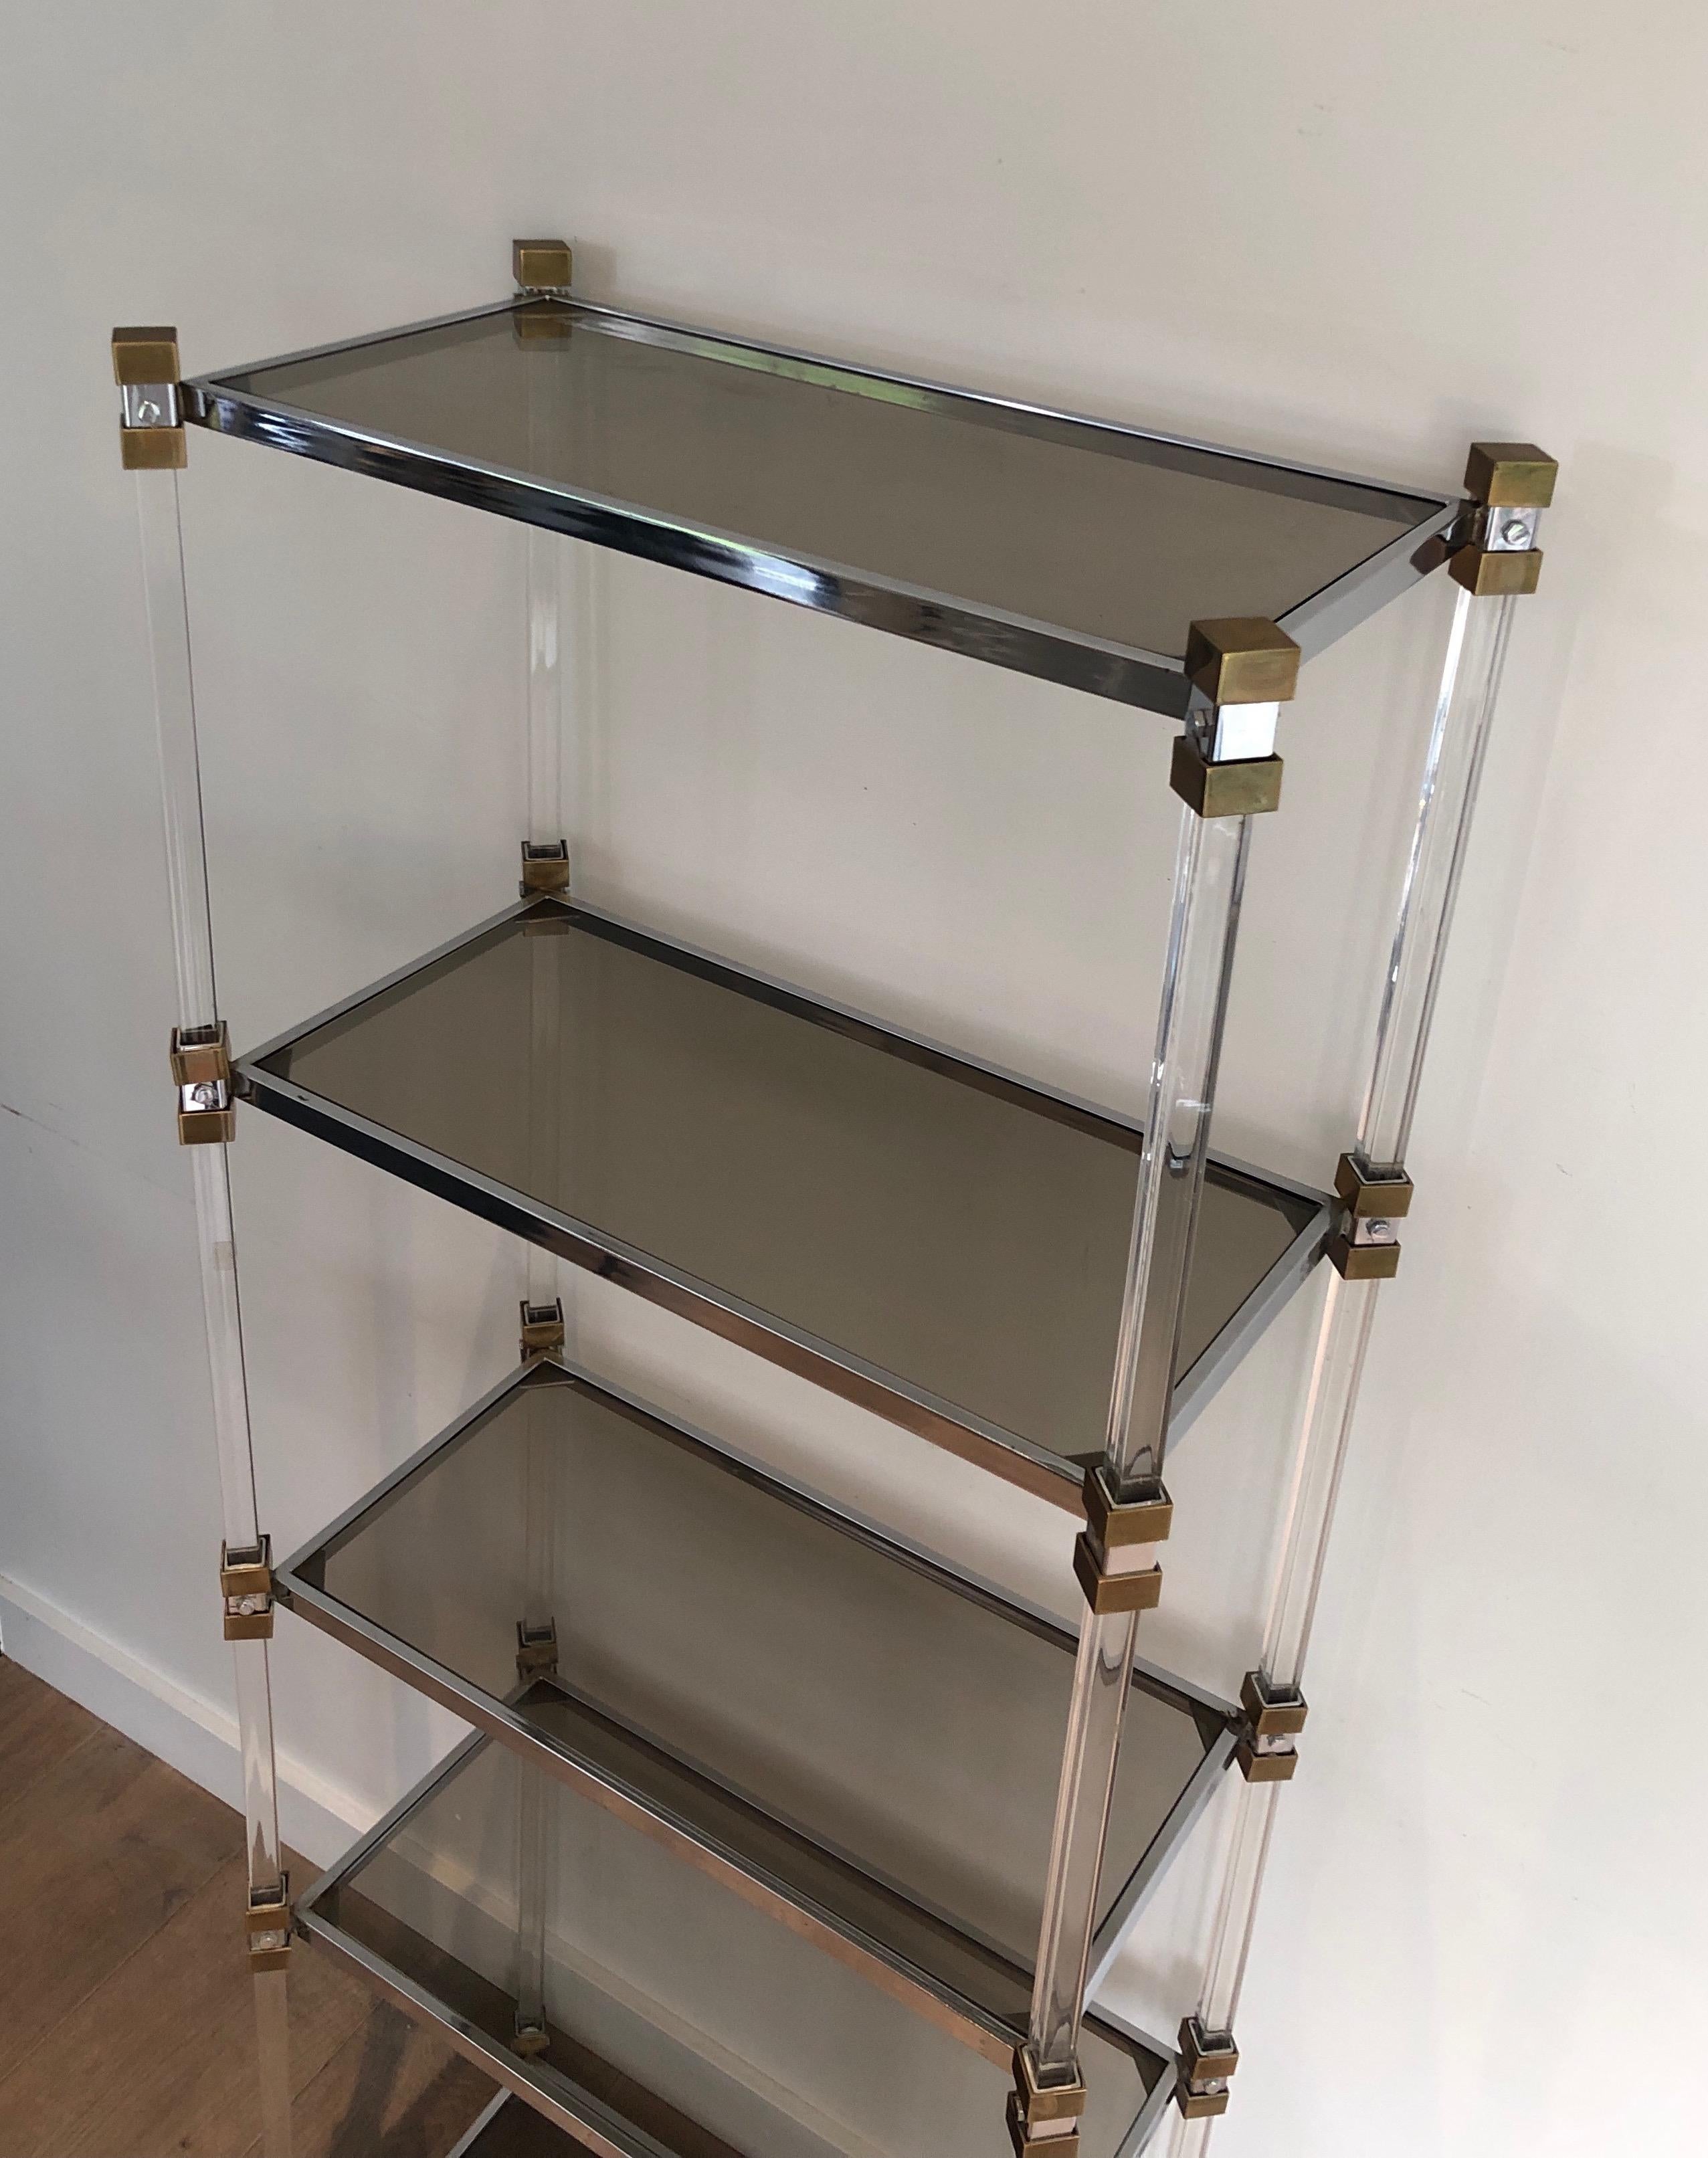 Late 20th Century Lucite, Brass and Glass Shelves Unit, French Work, Circa 1970